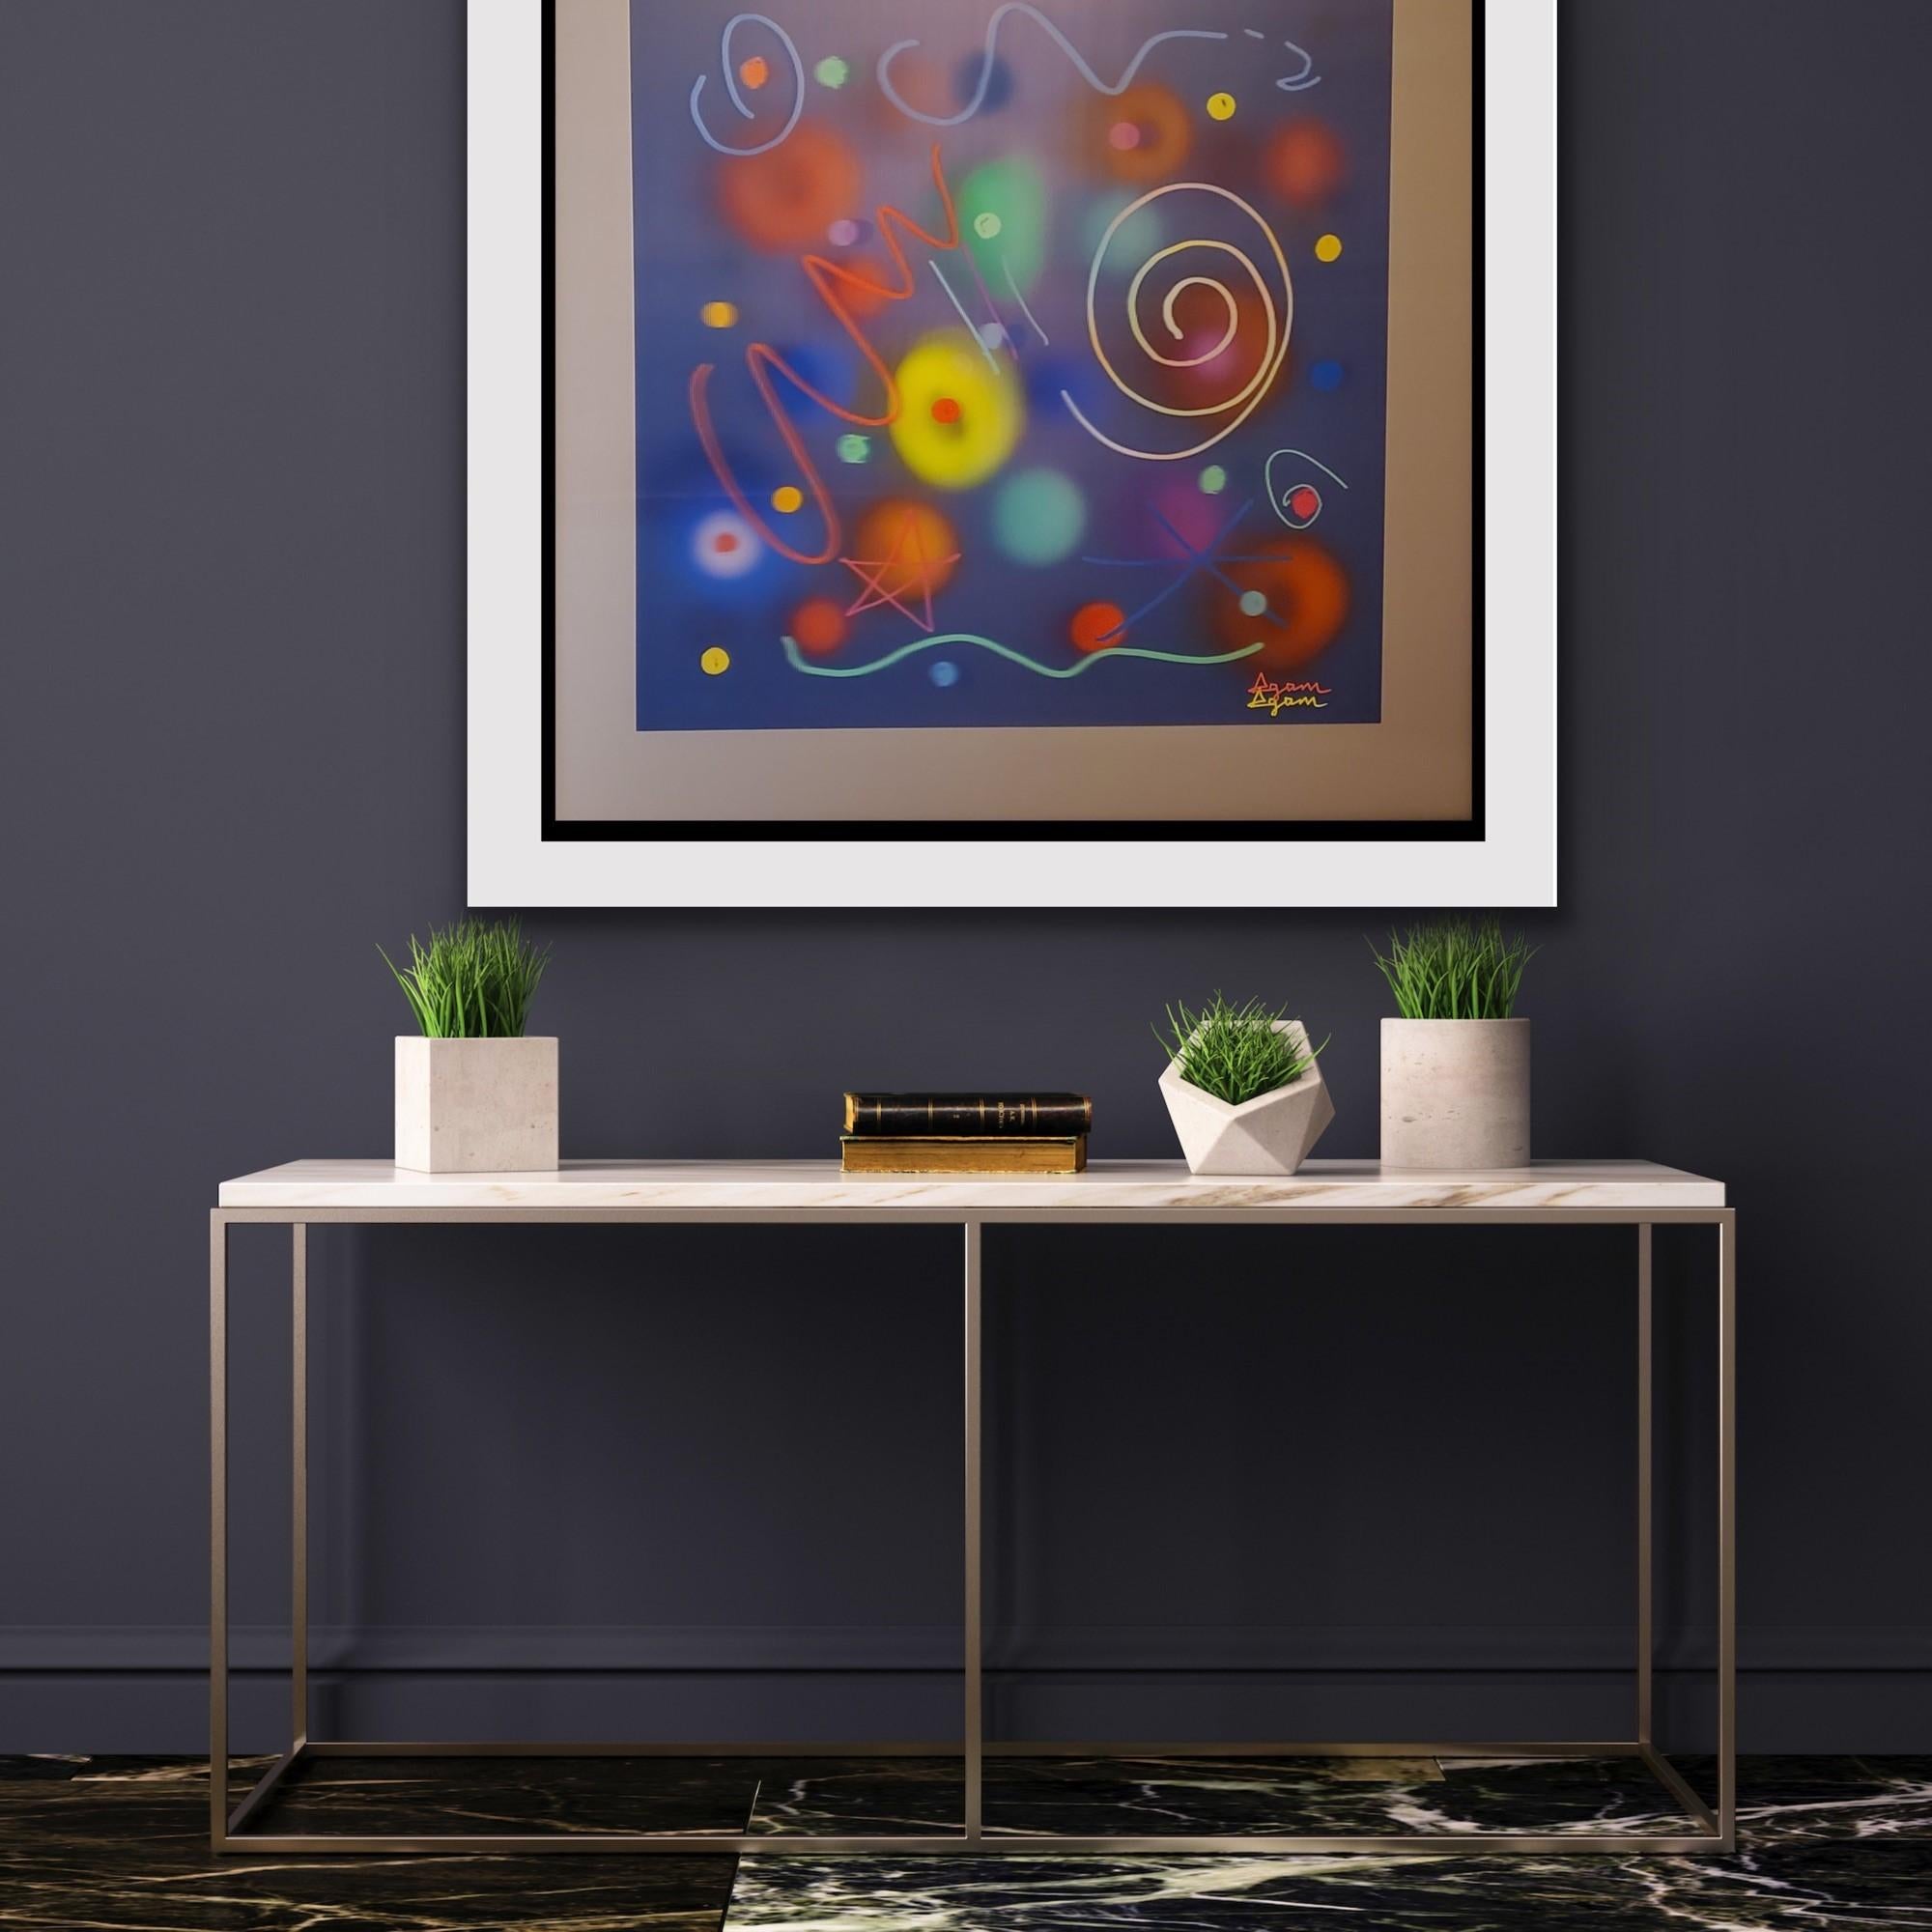 Galaxy Noon, 44 x 44, Holographic Layers, appraised at $216K, free shipping 6